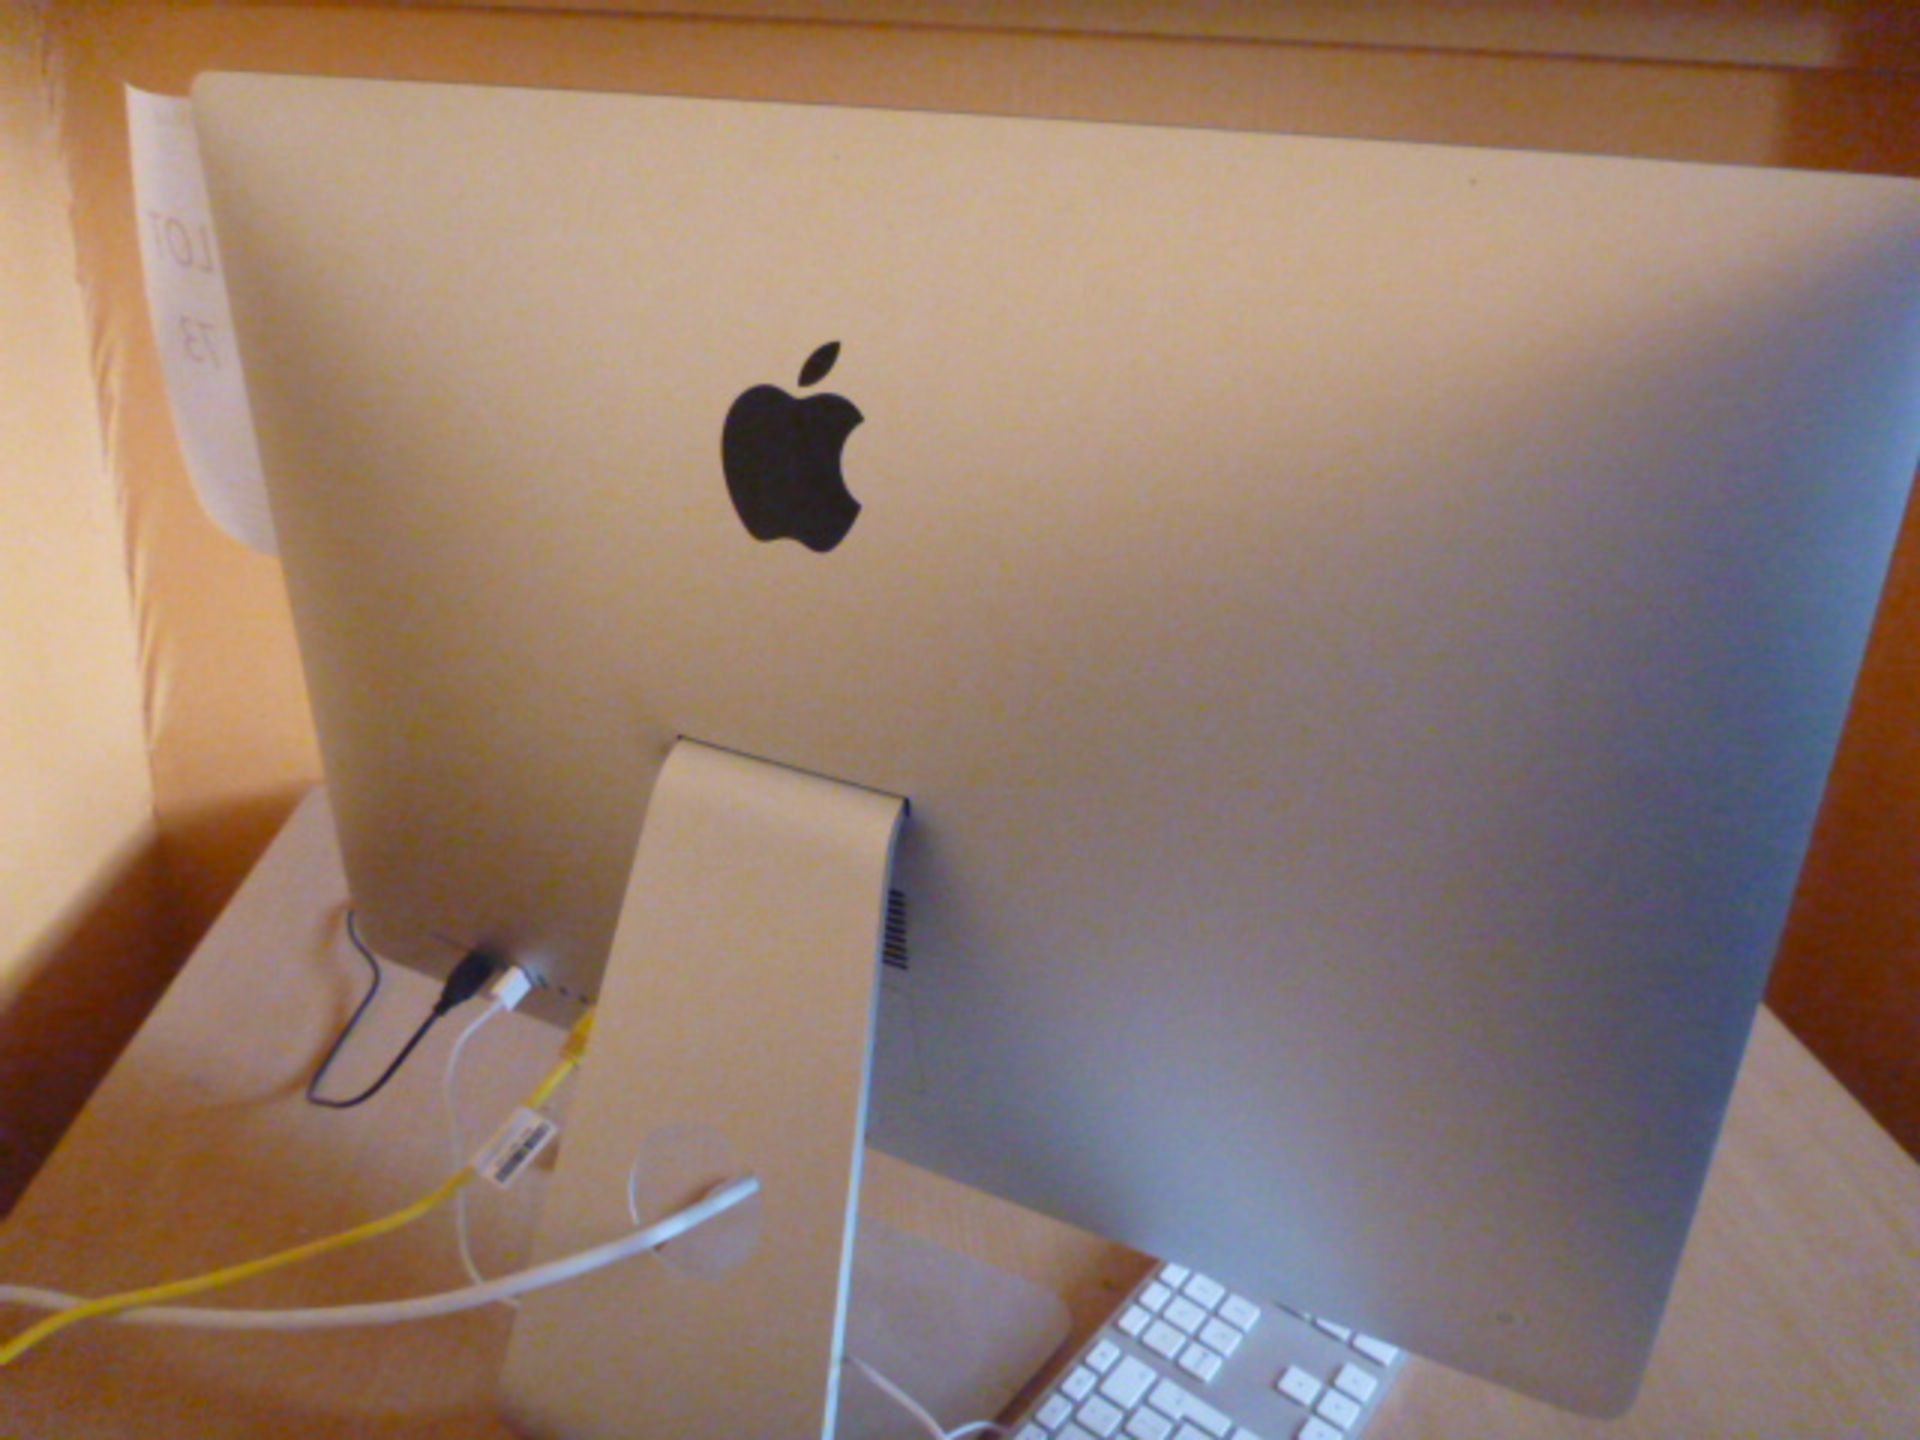 27" iMac Workstation 3.4GHz Intel Core i7, 16GB Ram, Late 2012 with Apple Keyboard and Mouse- This - Image 4 of 6